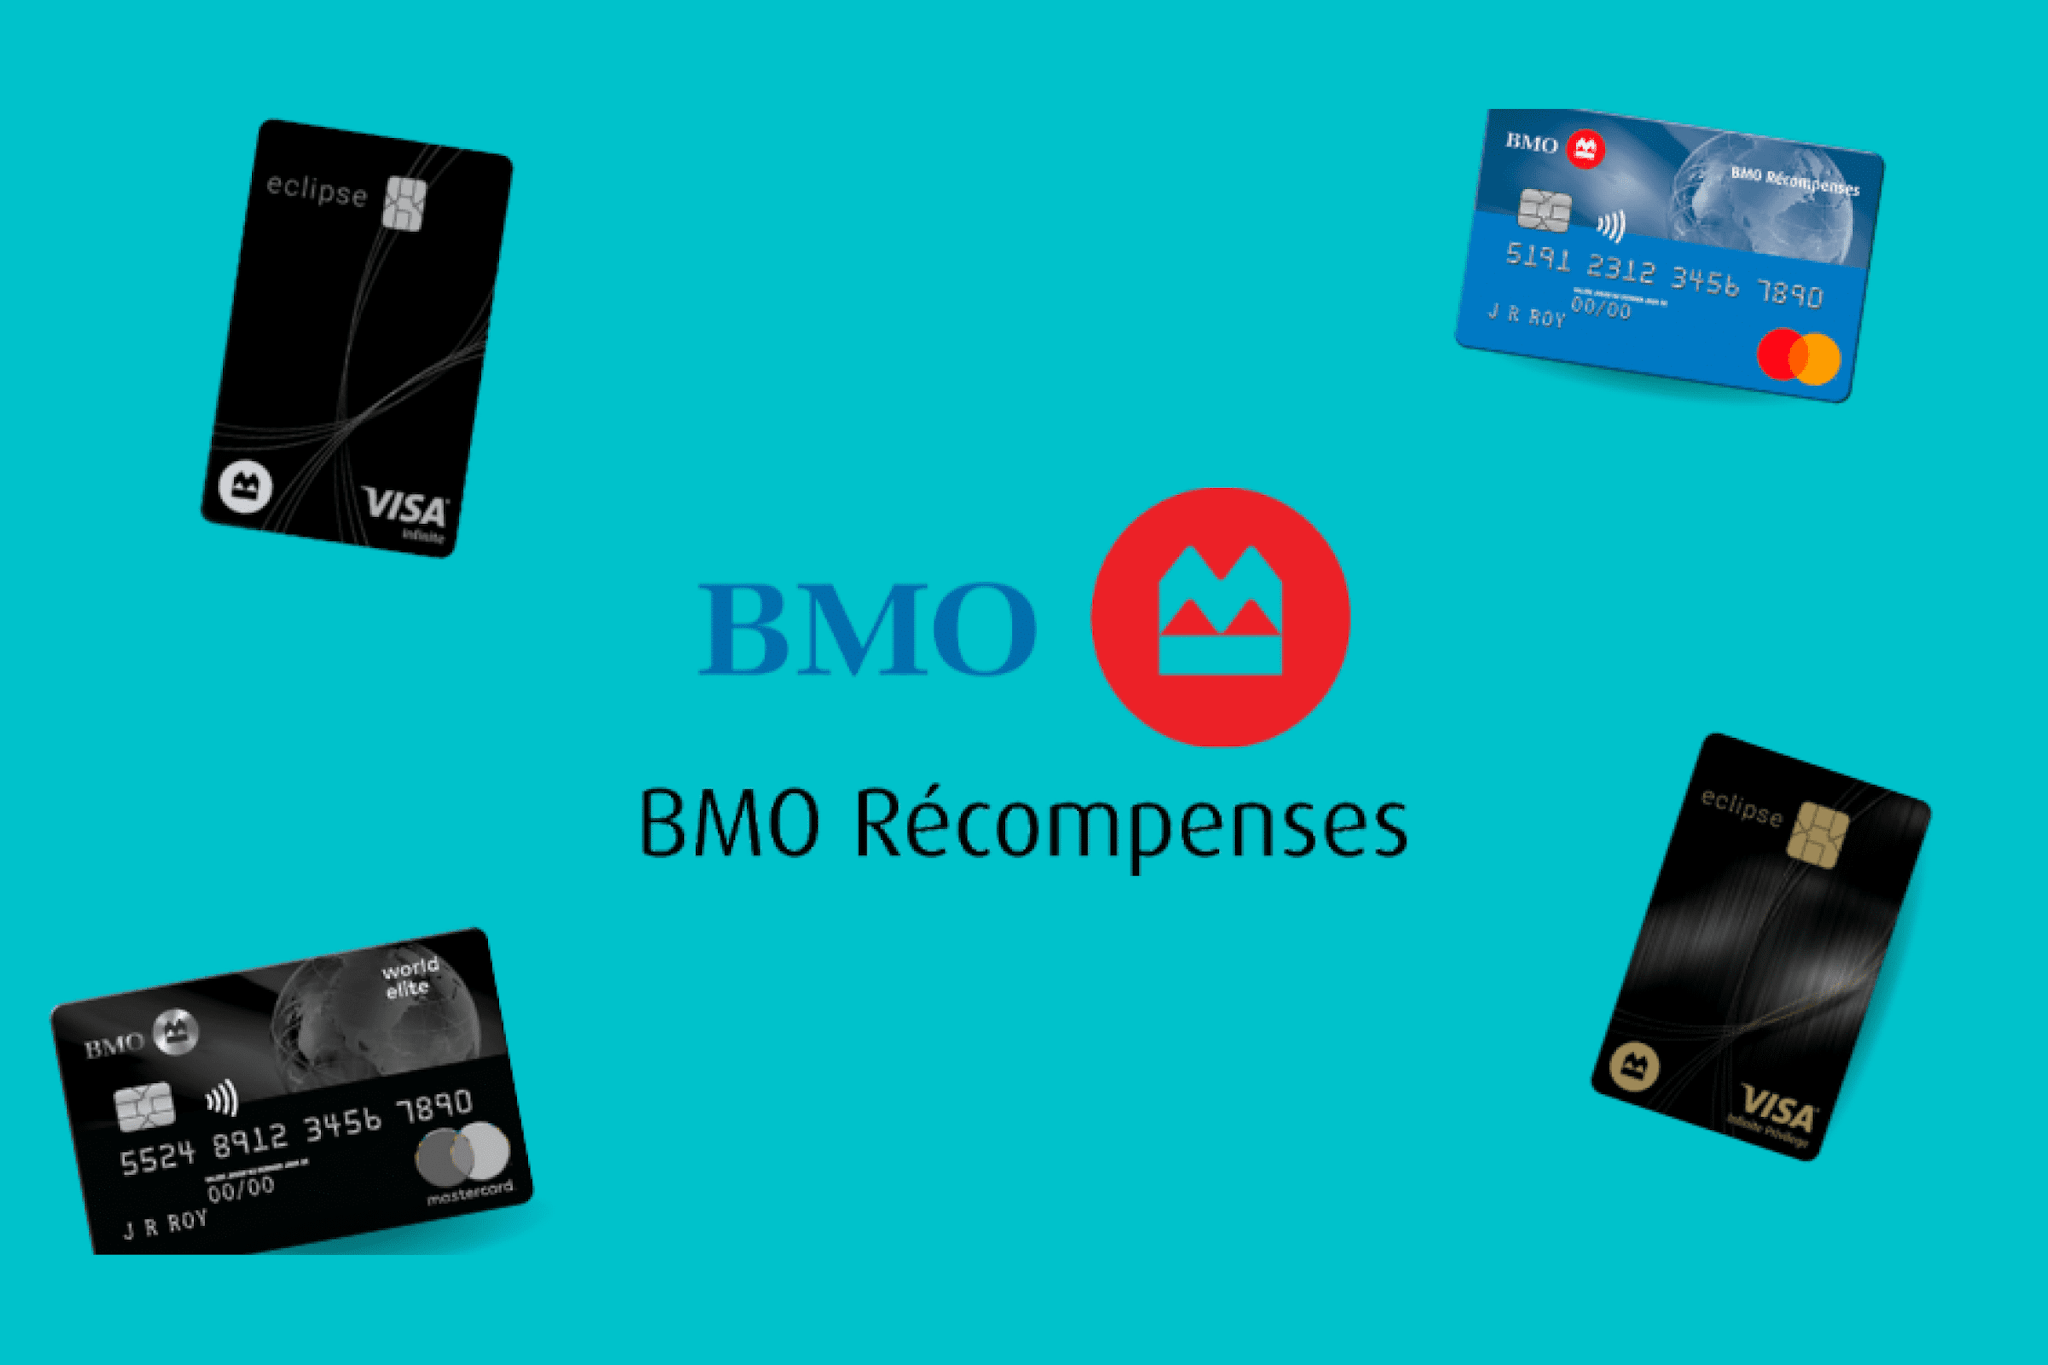 BMO credit cards and logo, showcasing financial services.